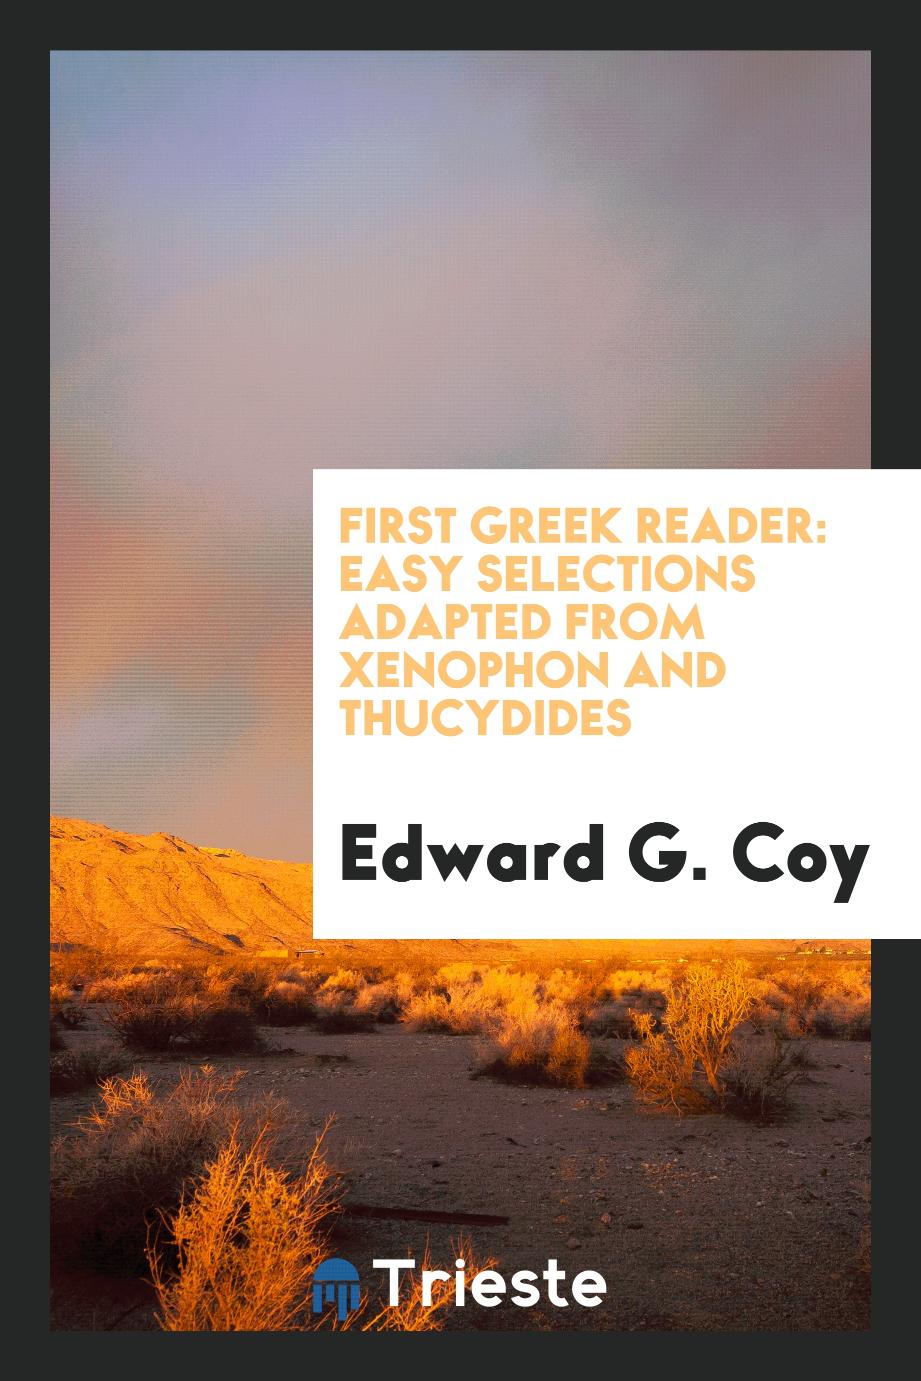 First Greek Reader: Easy Selections Adapted from Xenophon and Thucydides